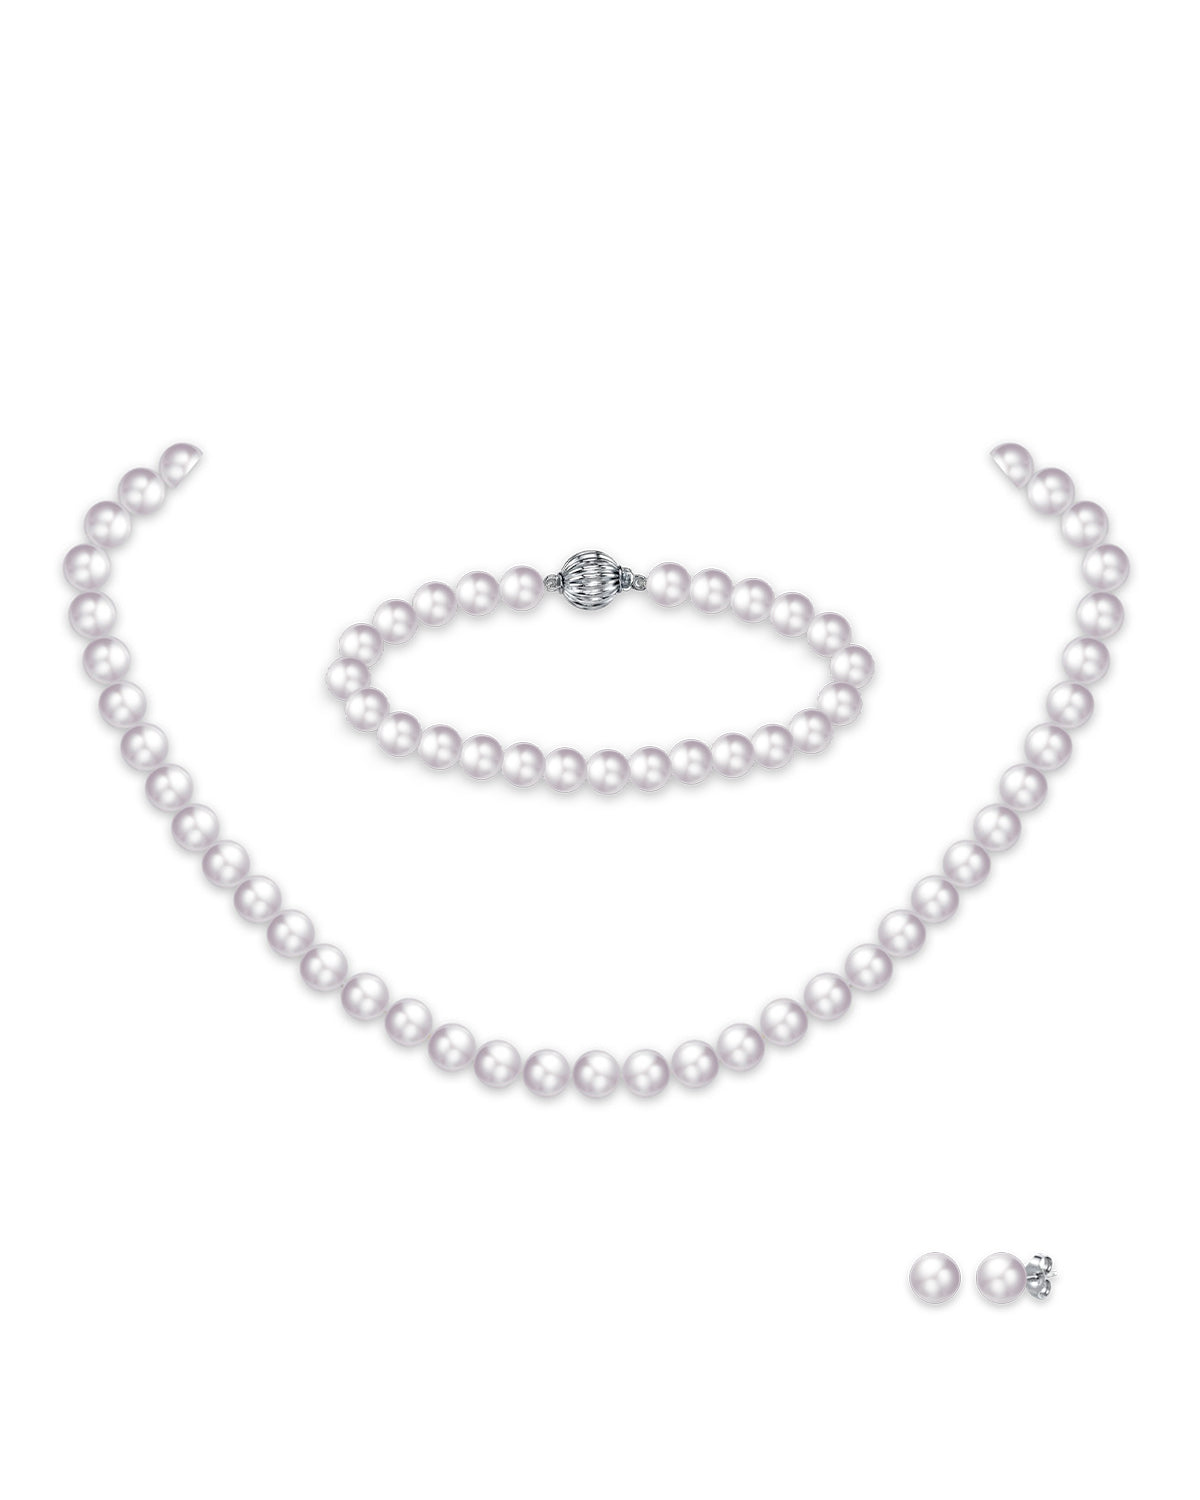 5.5-6.5mm Freshwater White Pearl Sets in AA+ Quality